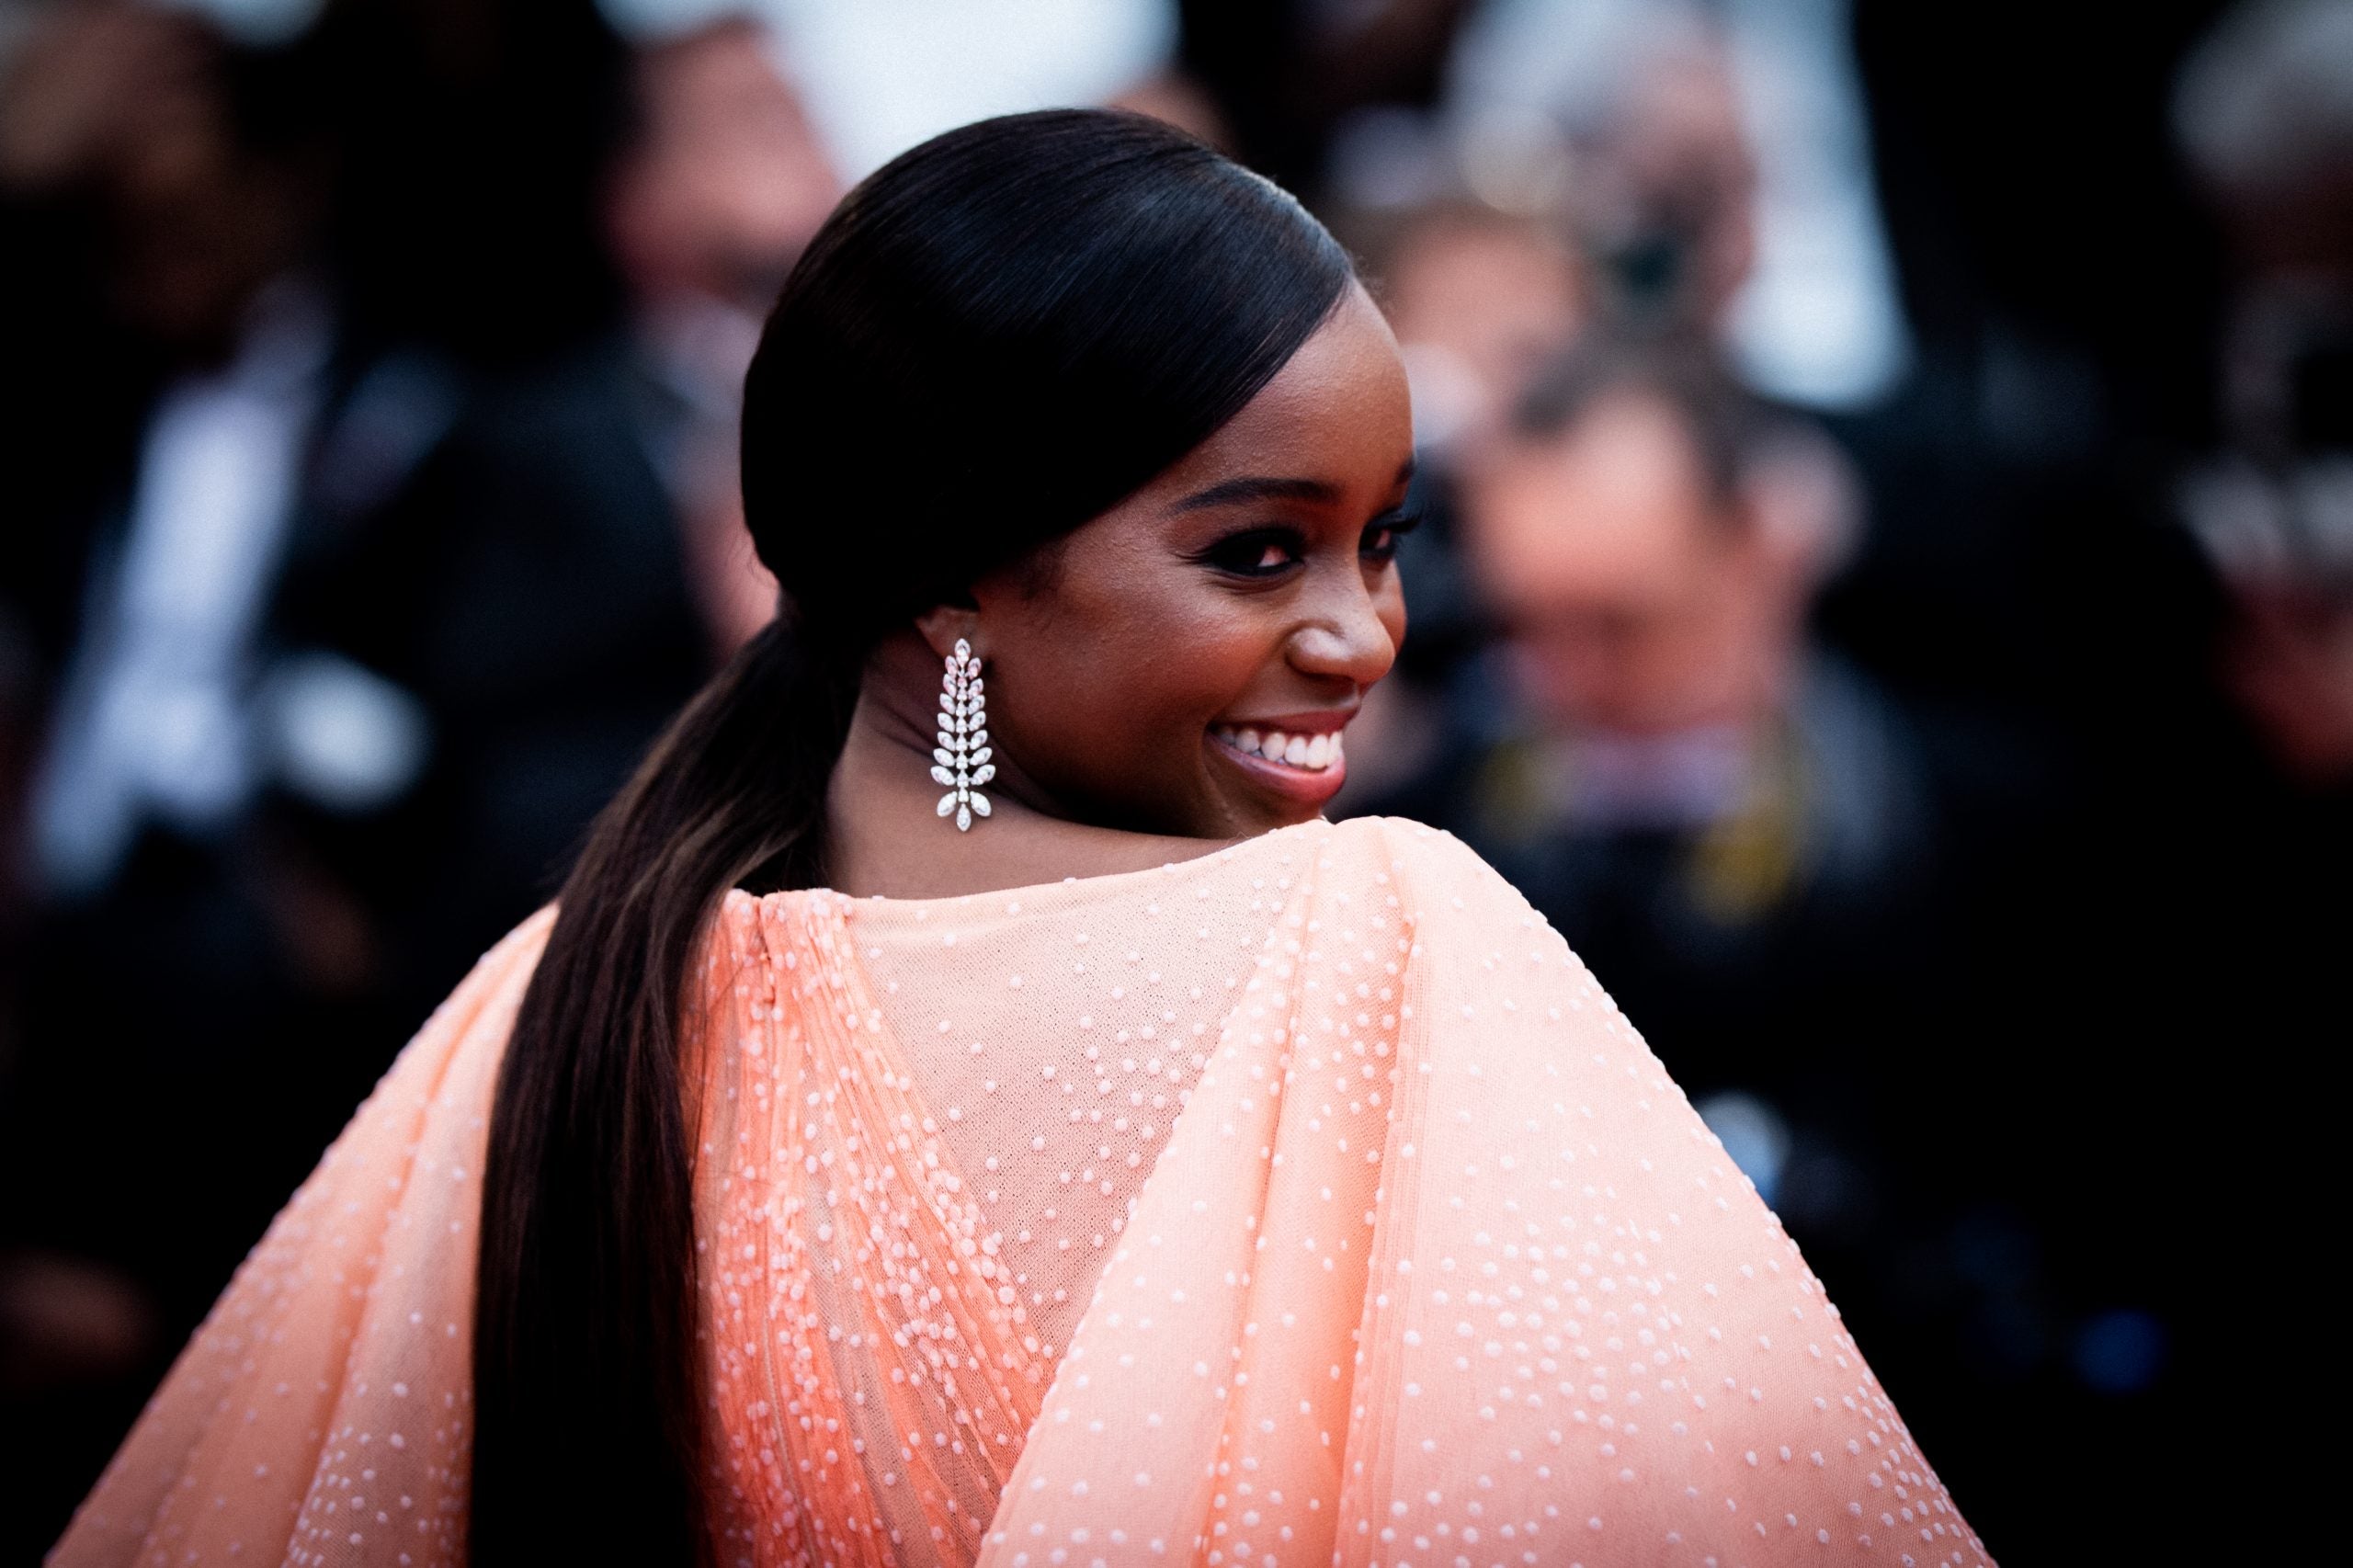 Actress Aja Naomi King Is Pregnant With Her Rainbow Baby After Suffering Two Miscarriages